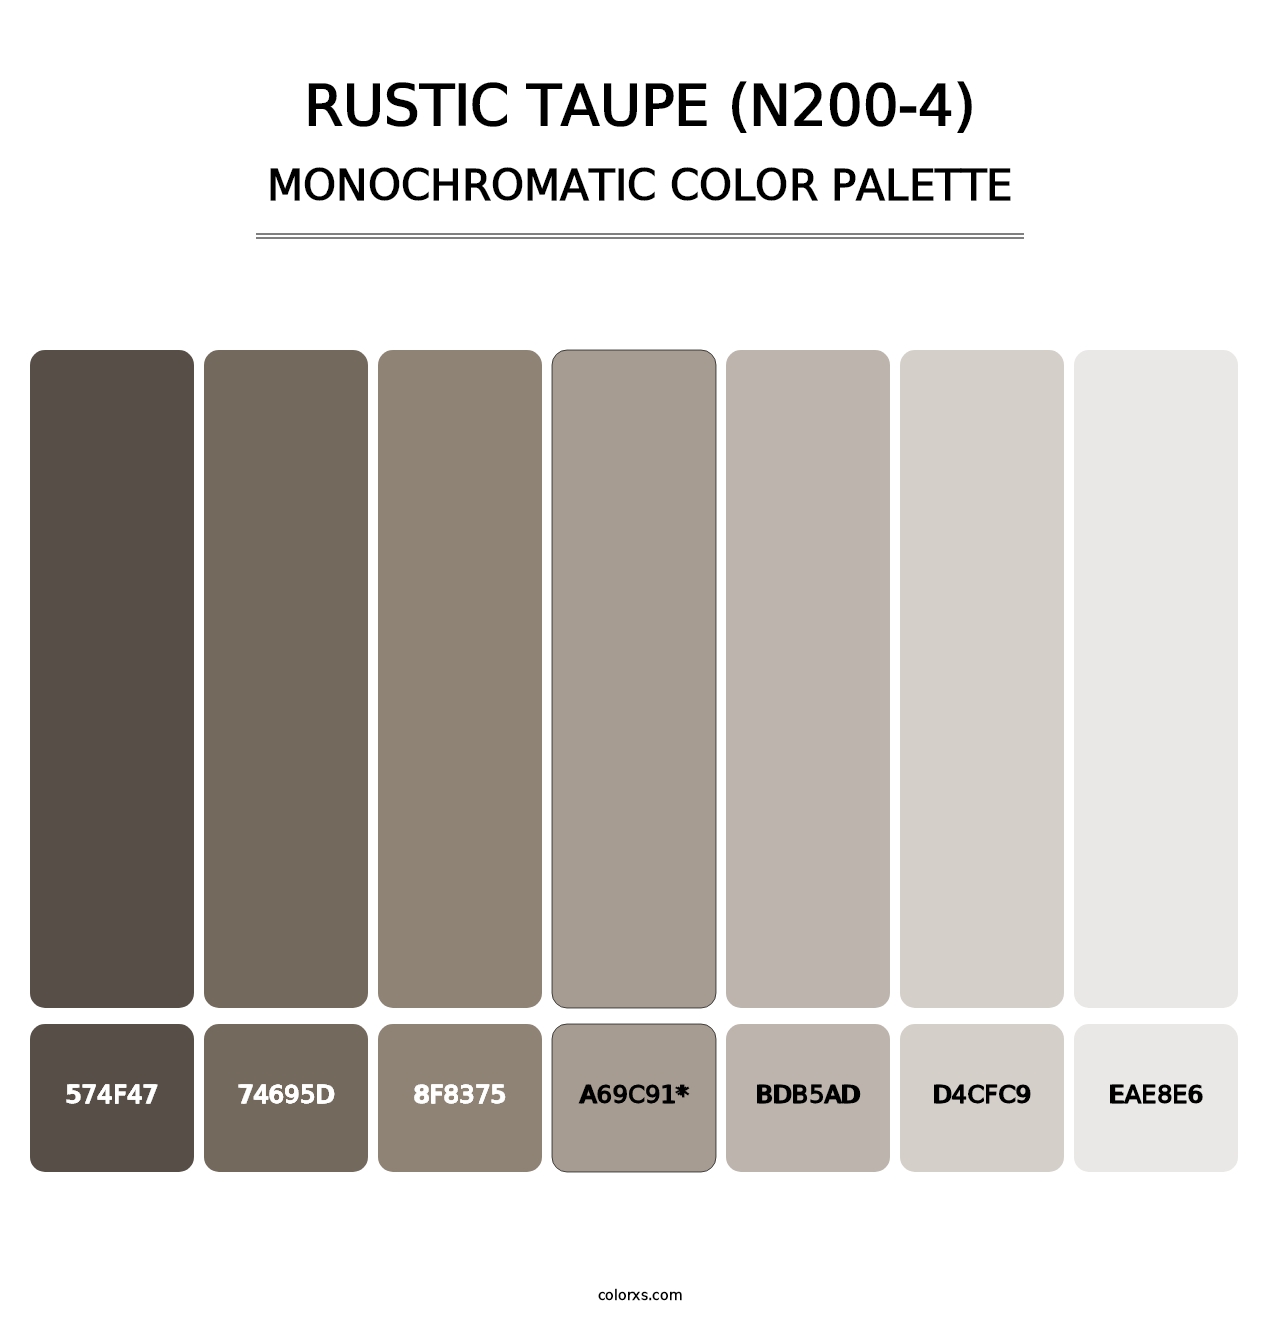 Rustic Taupe (N200-4) - Monochromatic Color Palette